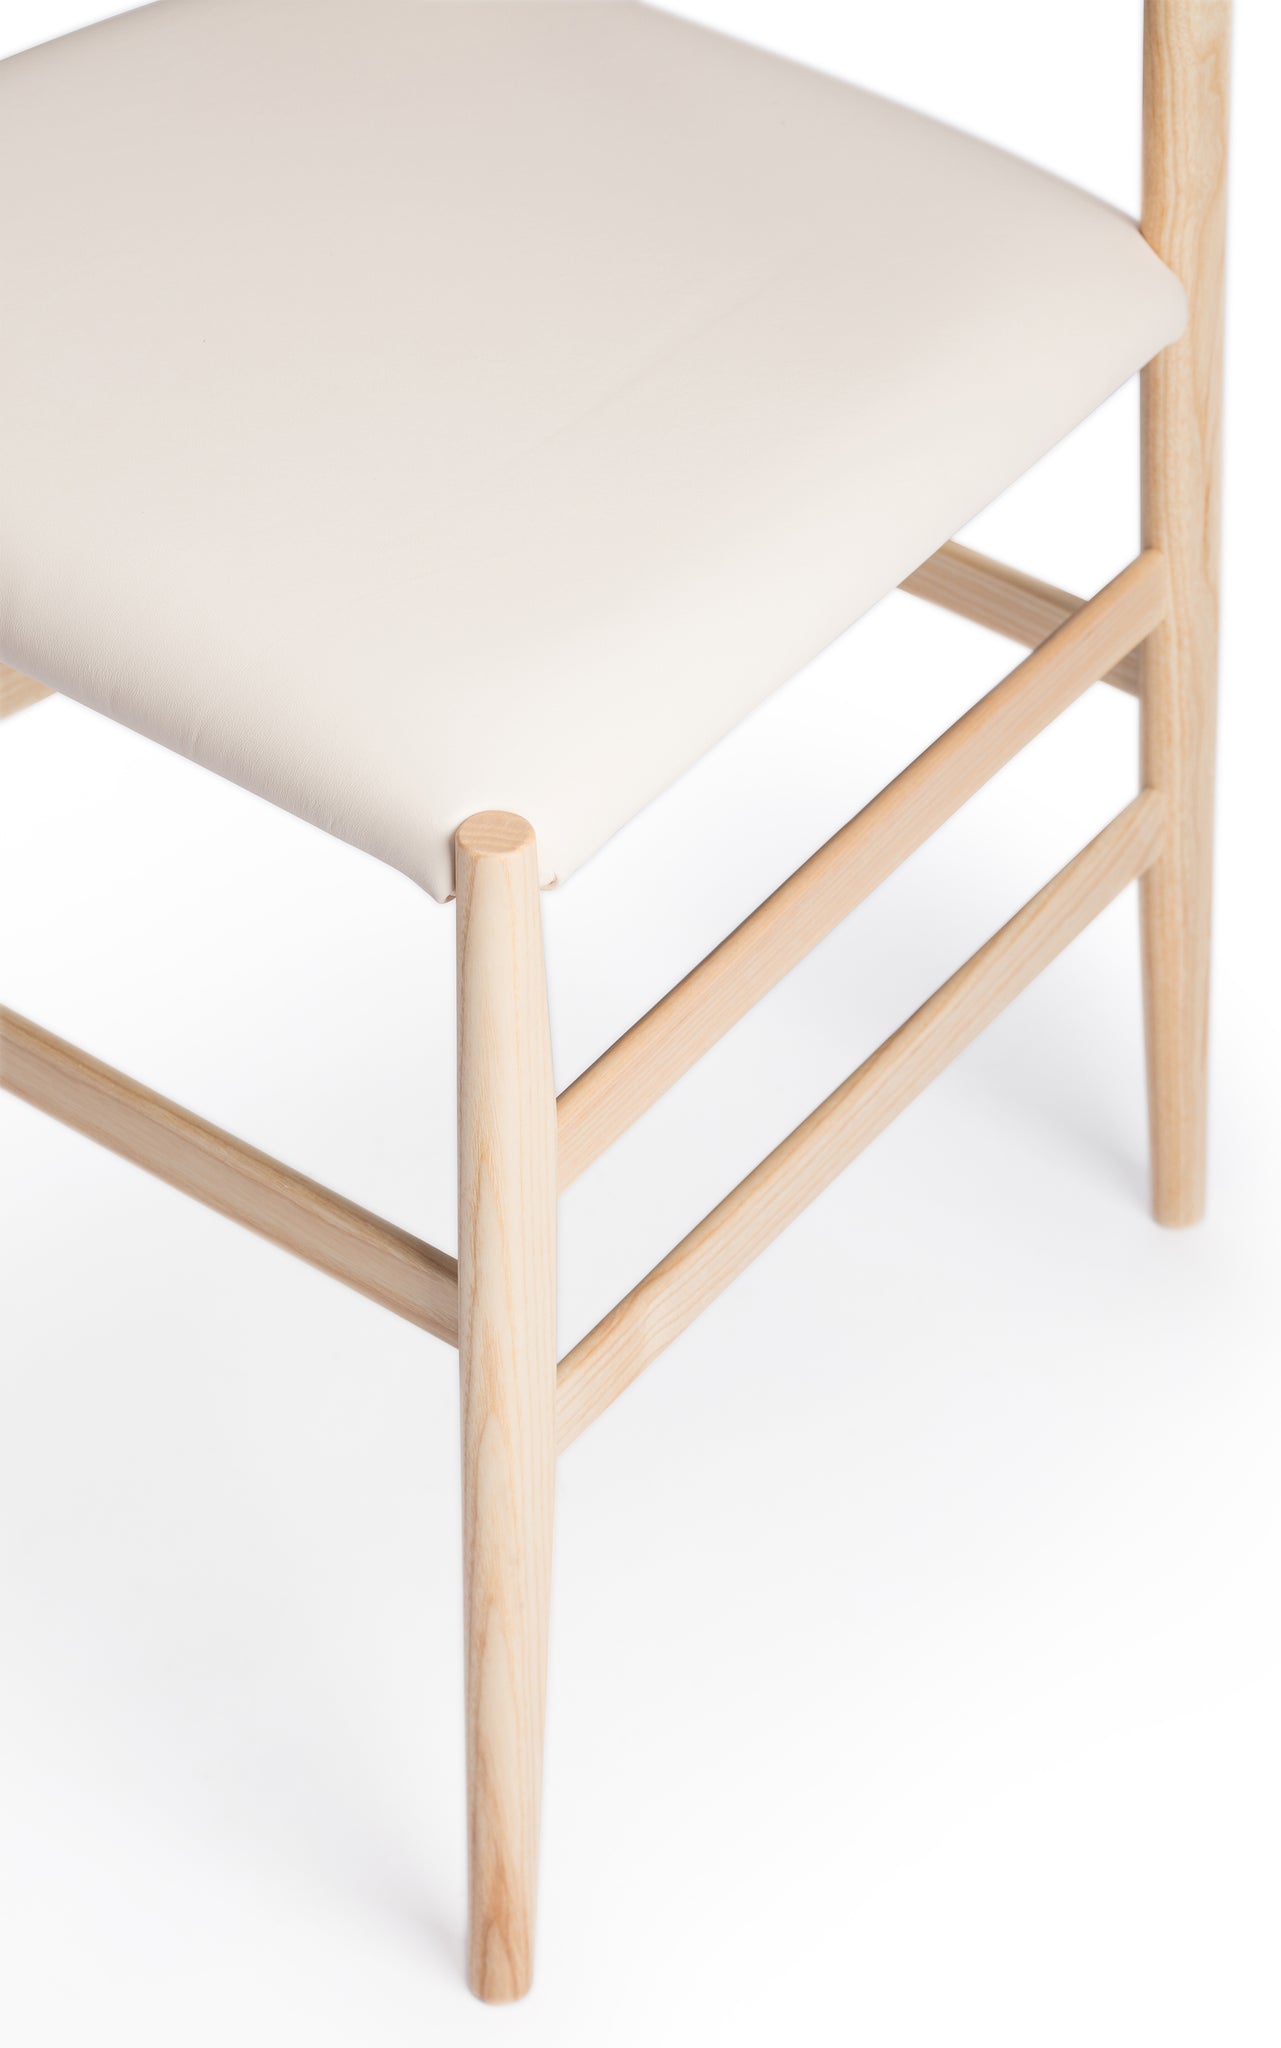 Close-up 3 of a Snella Modern Side Chair, natural ash frame, soft white leather seat, closely resembling the superleggera chair by Gio Ponti, ultra-lightweight at 5 lbs, contract grade. Manufactured by Klarel in Italy. #K42-1